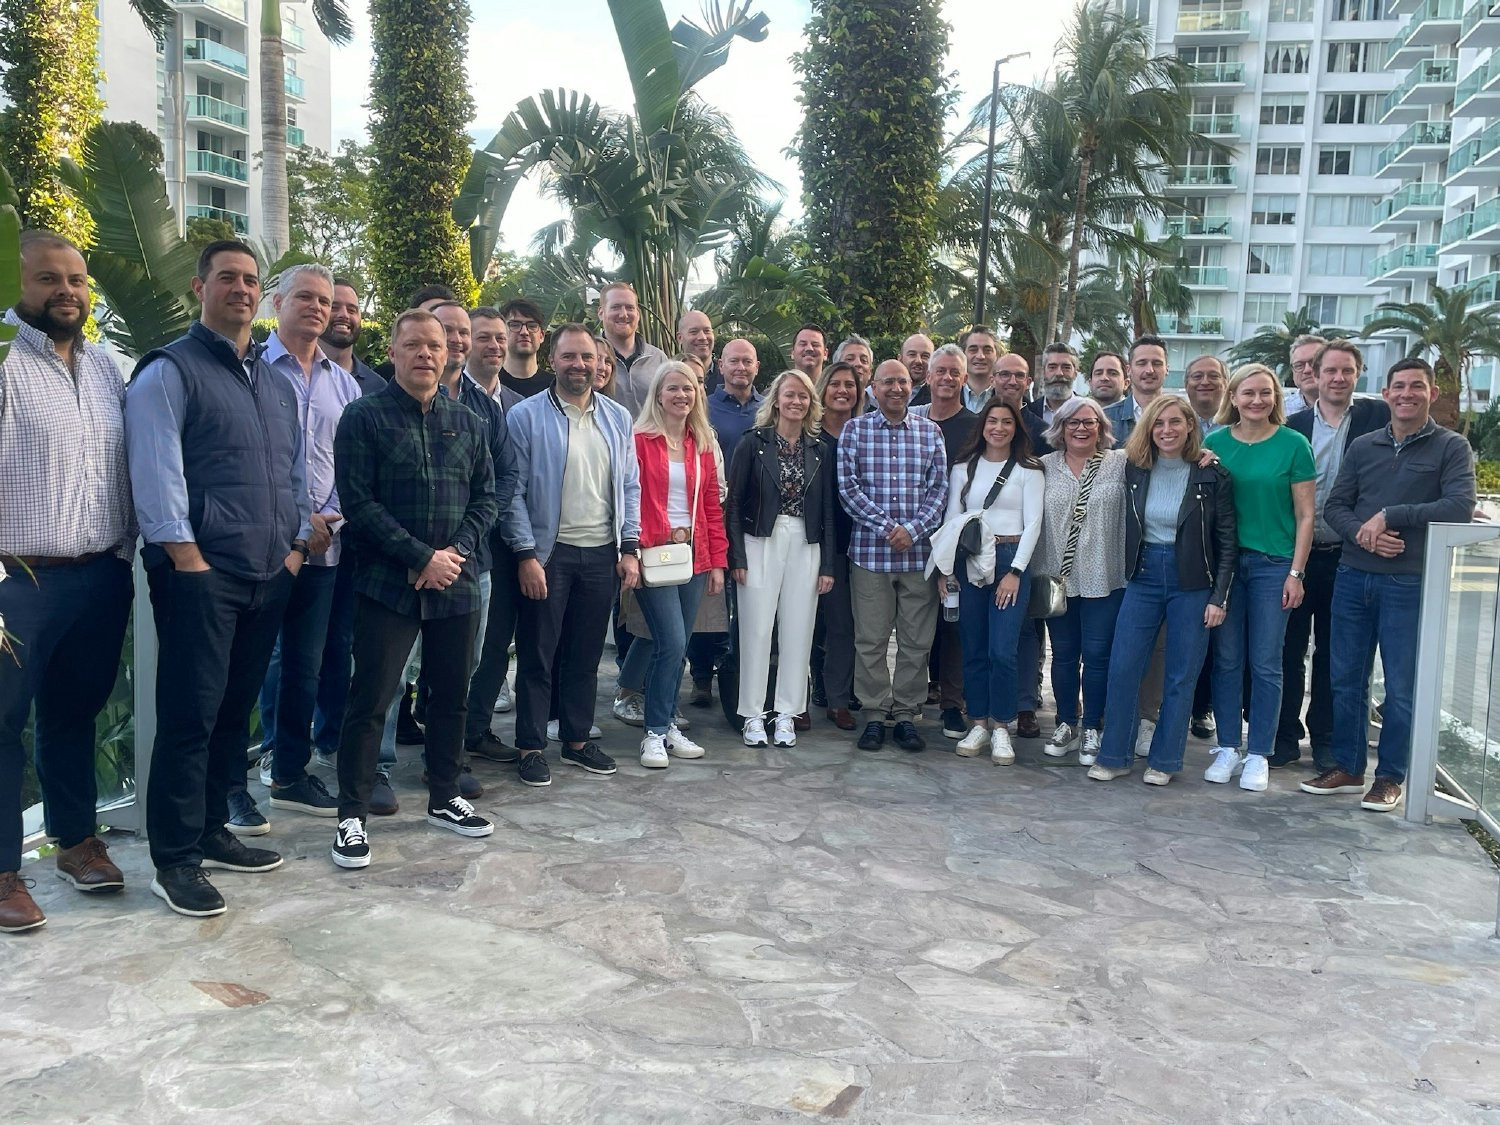 Global meeting in Miami with colleagues from across Europe and US